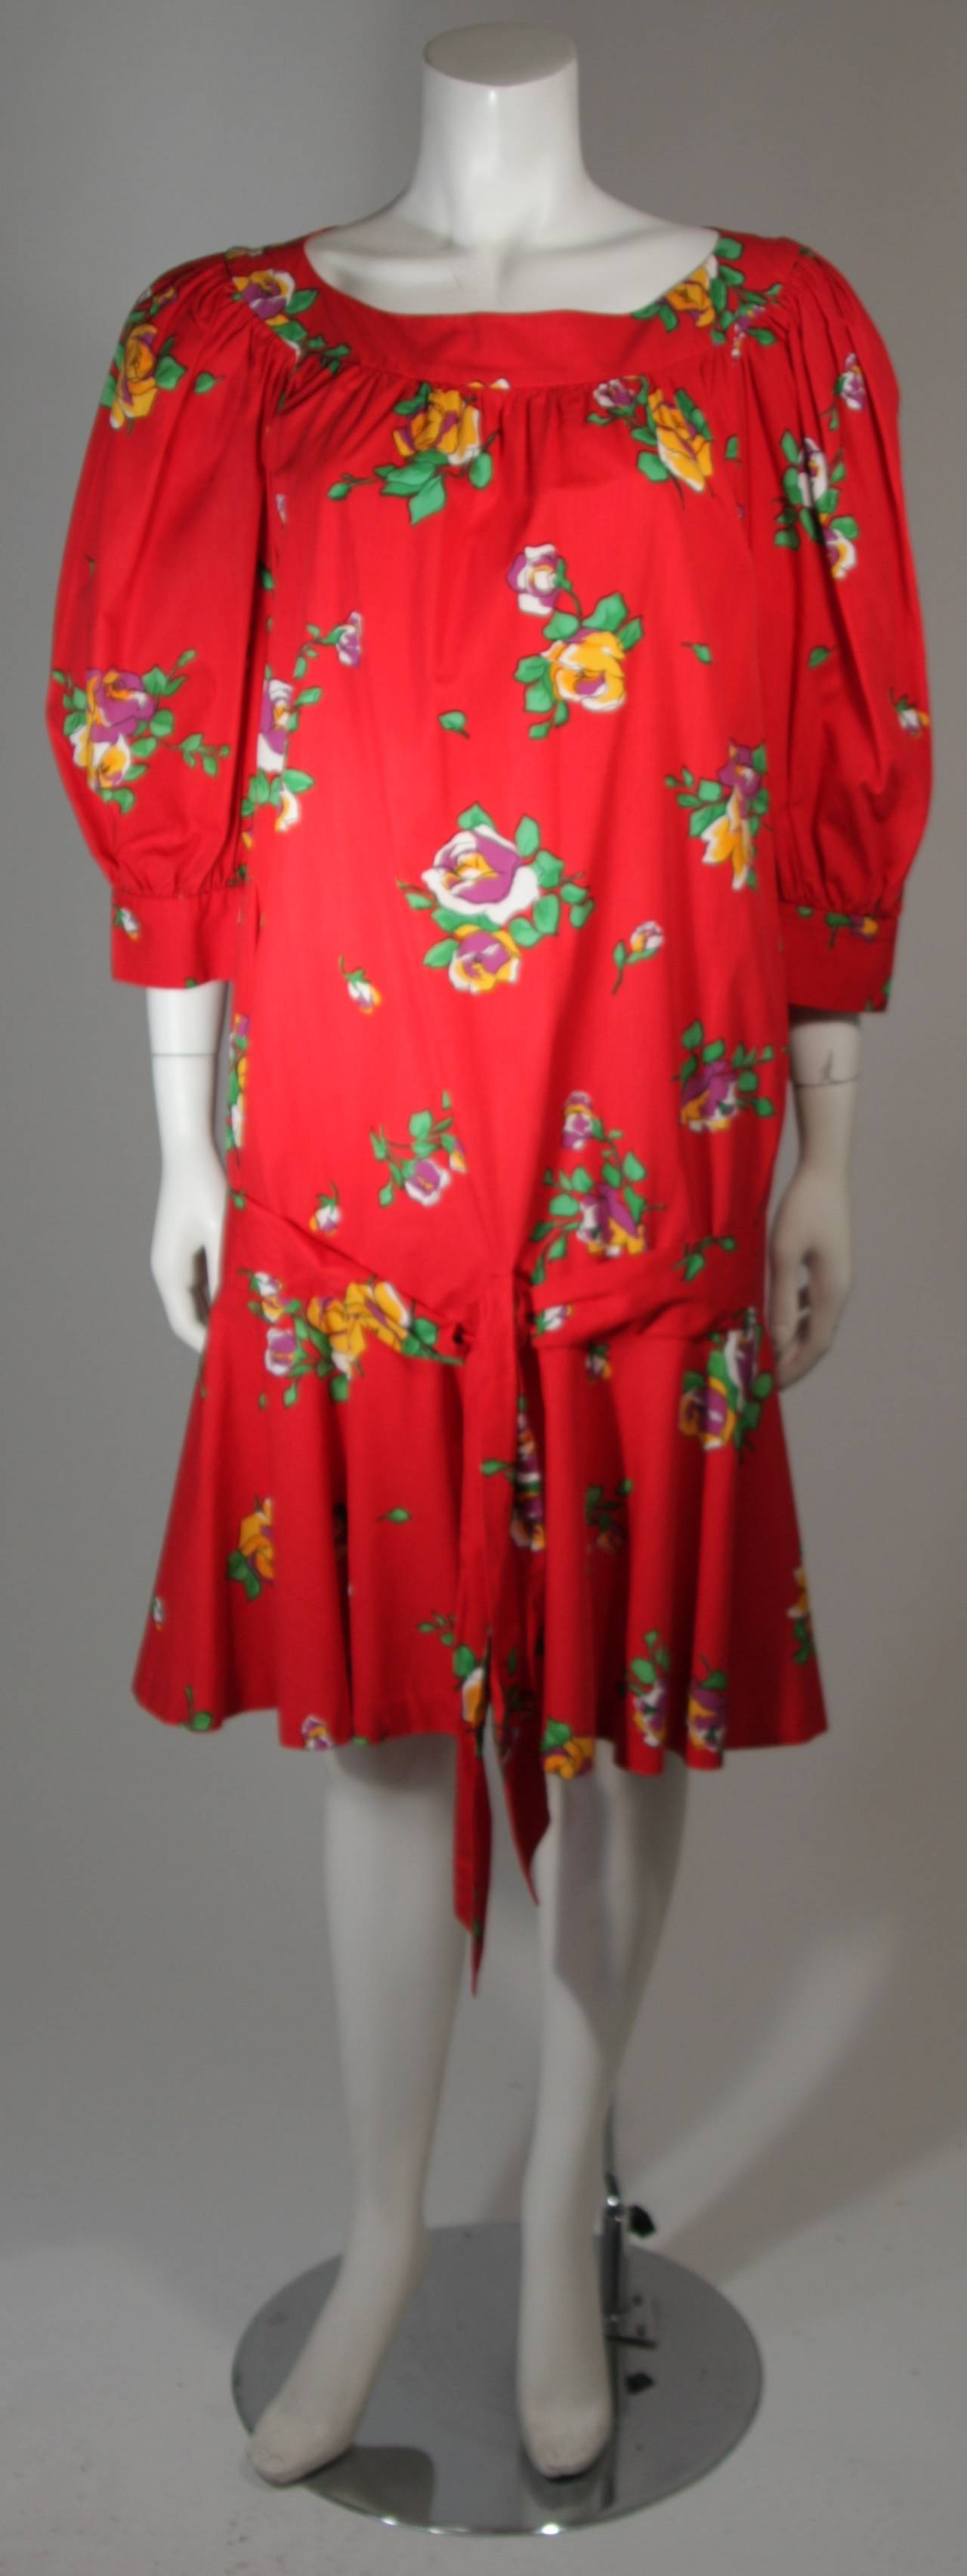 This Yves Saint Laurent dress is composed of a red cotton and features a floral pattern. There are buttons at the sleeves and a hip tie detail. In excellent condition. Made in France.

**Please cross-reference measurements for personal accuracy.